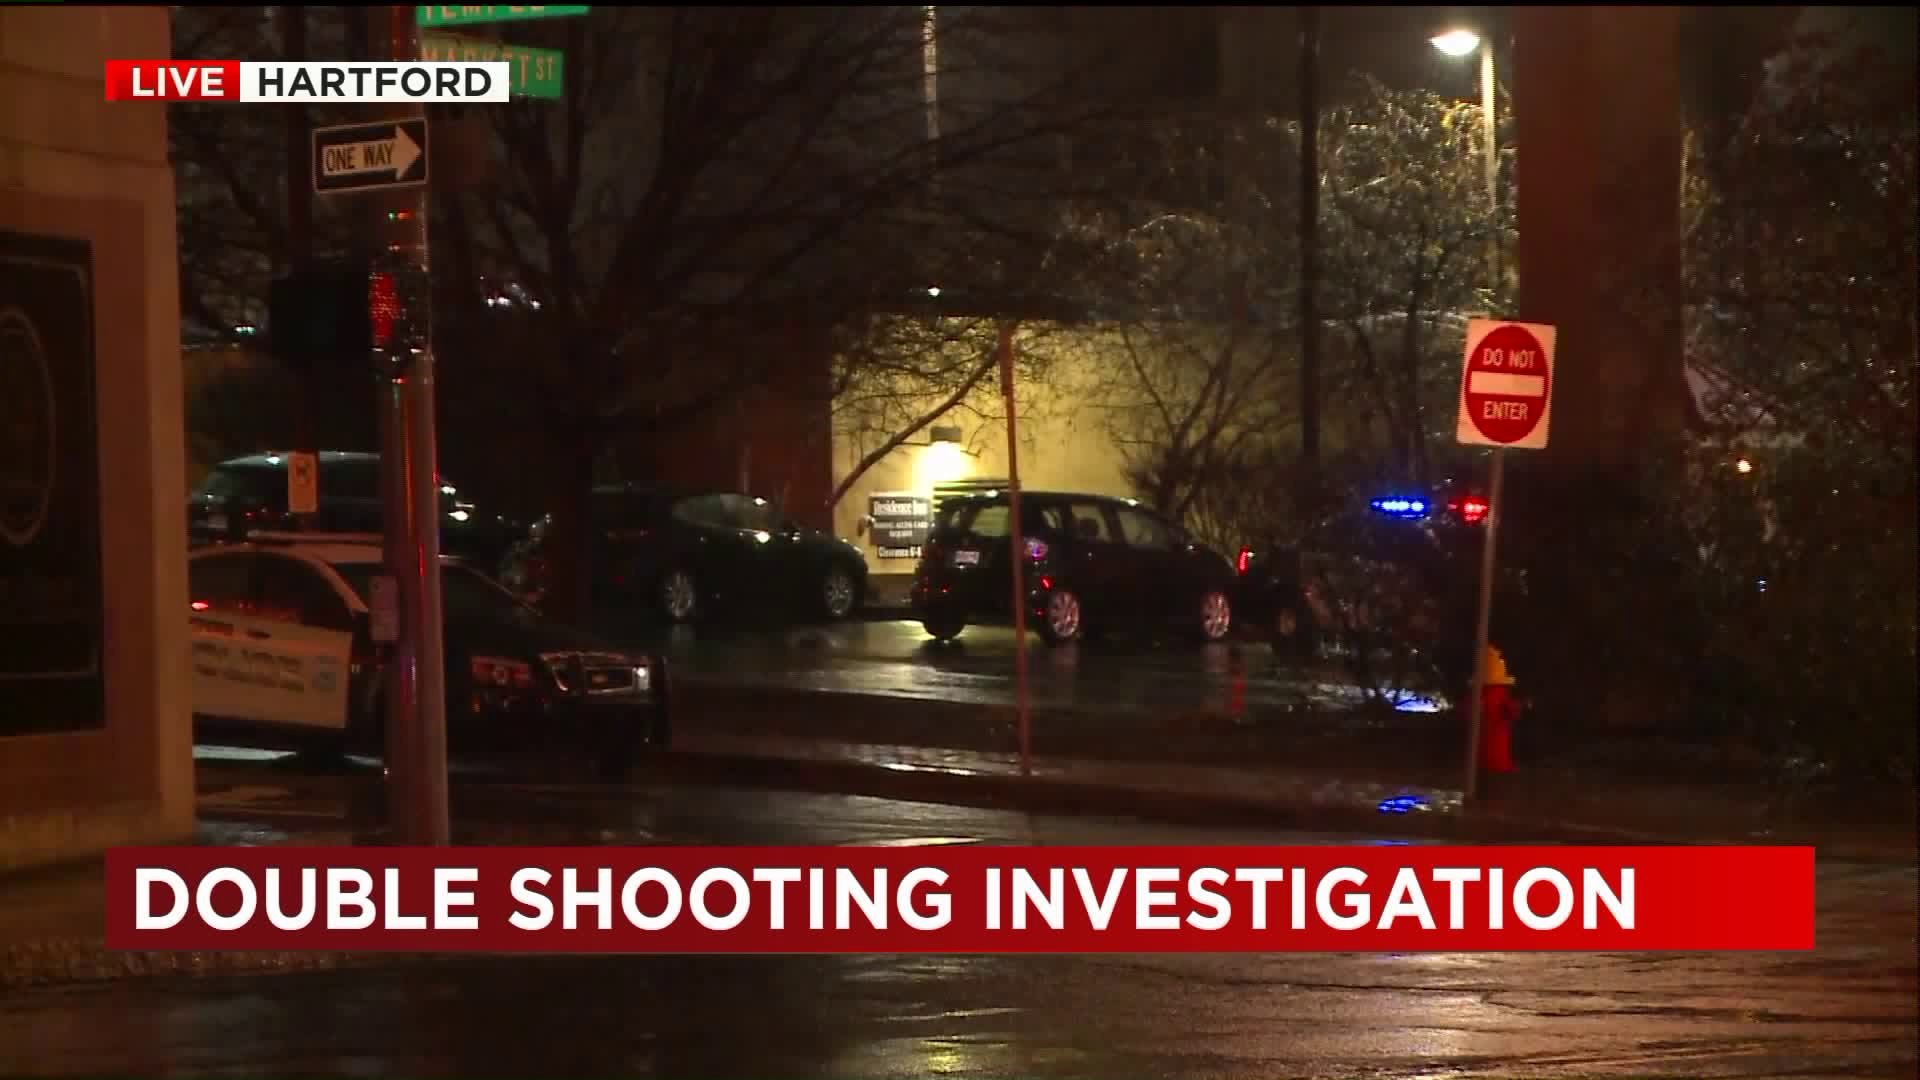 NYE Double Shooting in Hartford